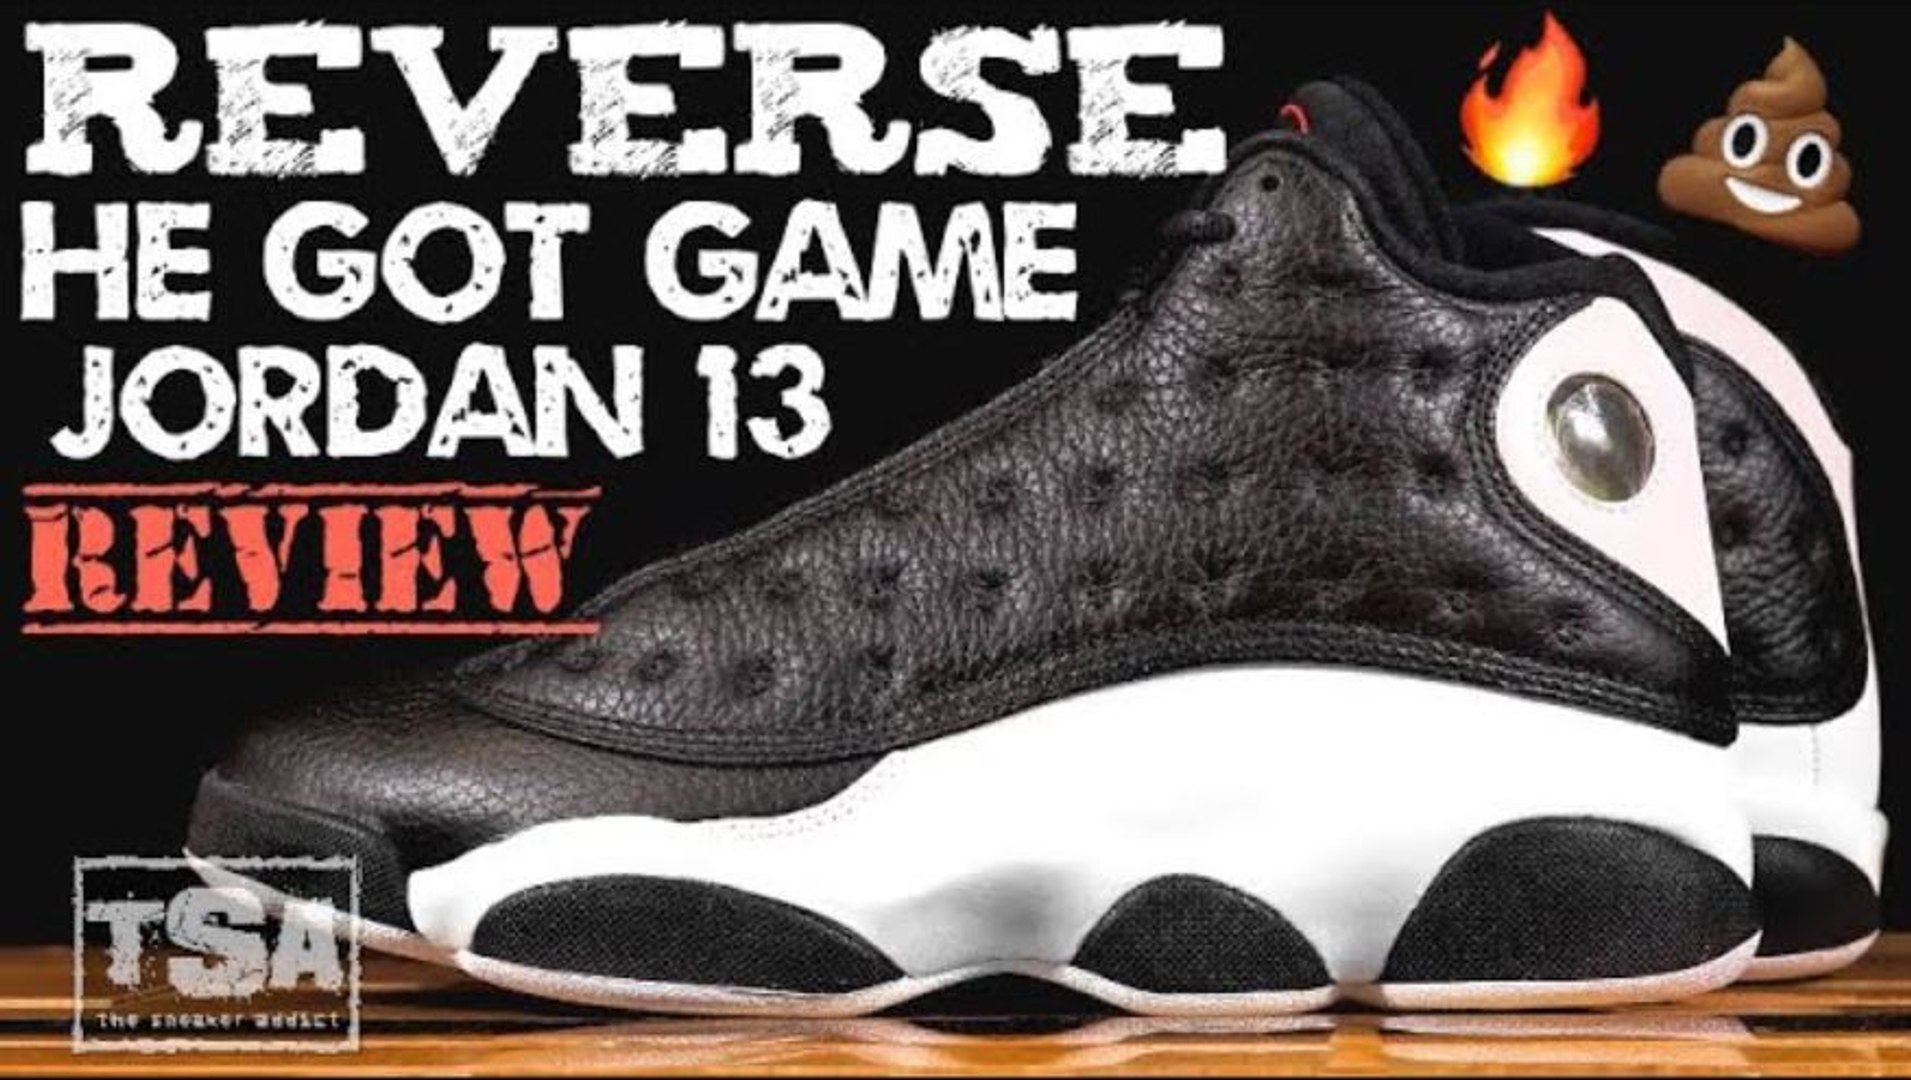 Air Jordan 13 Reverse He Got Game 2020 Retro Sneaker Honest Review Vs OG  and Playoff Colorways - video Dailymotion